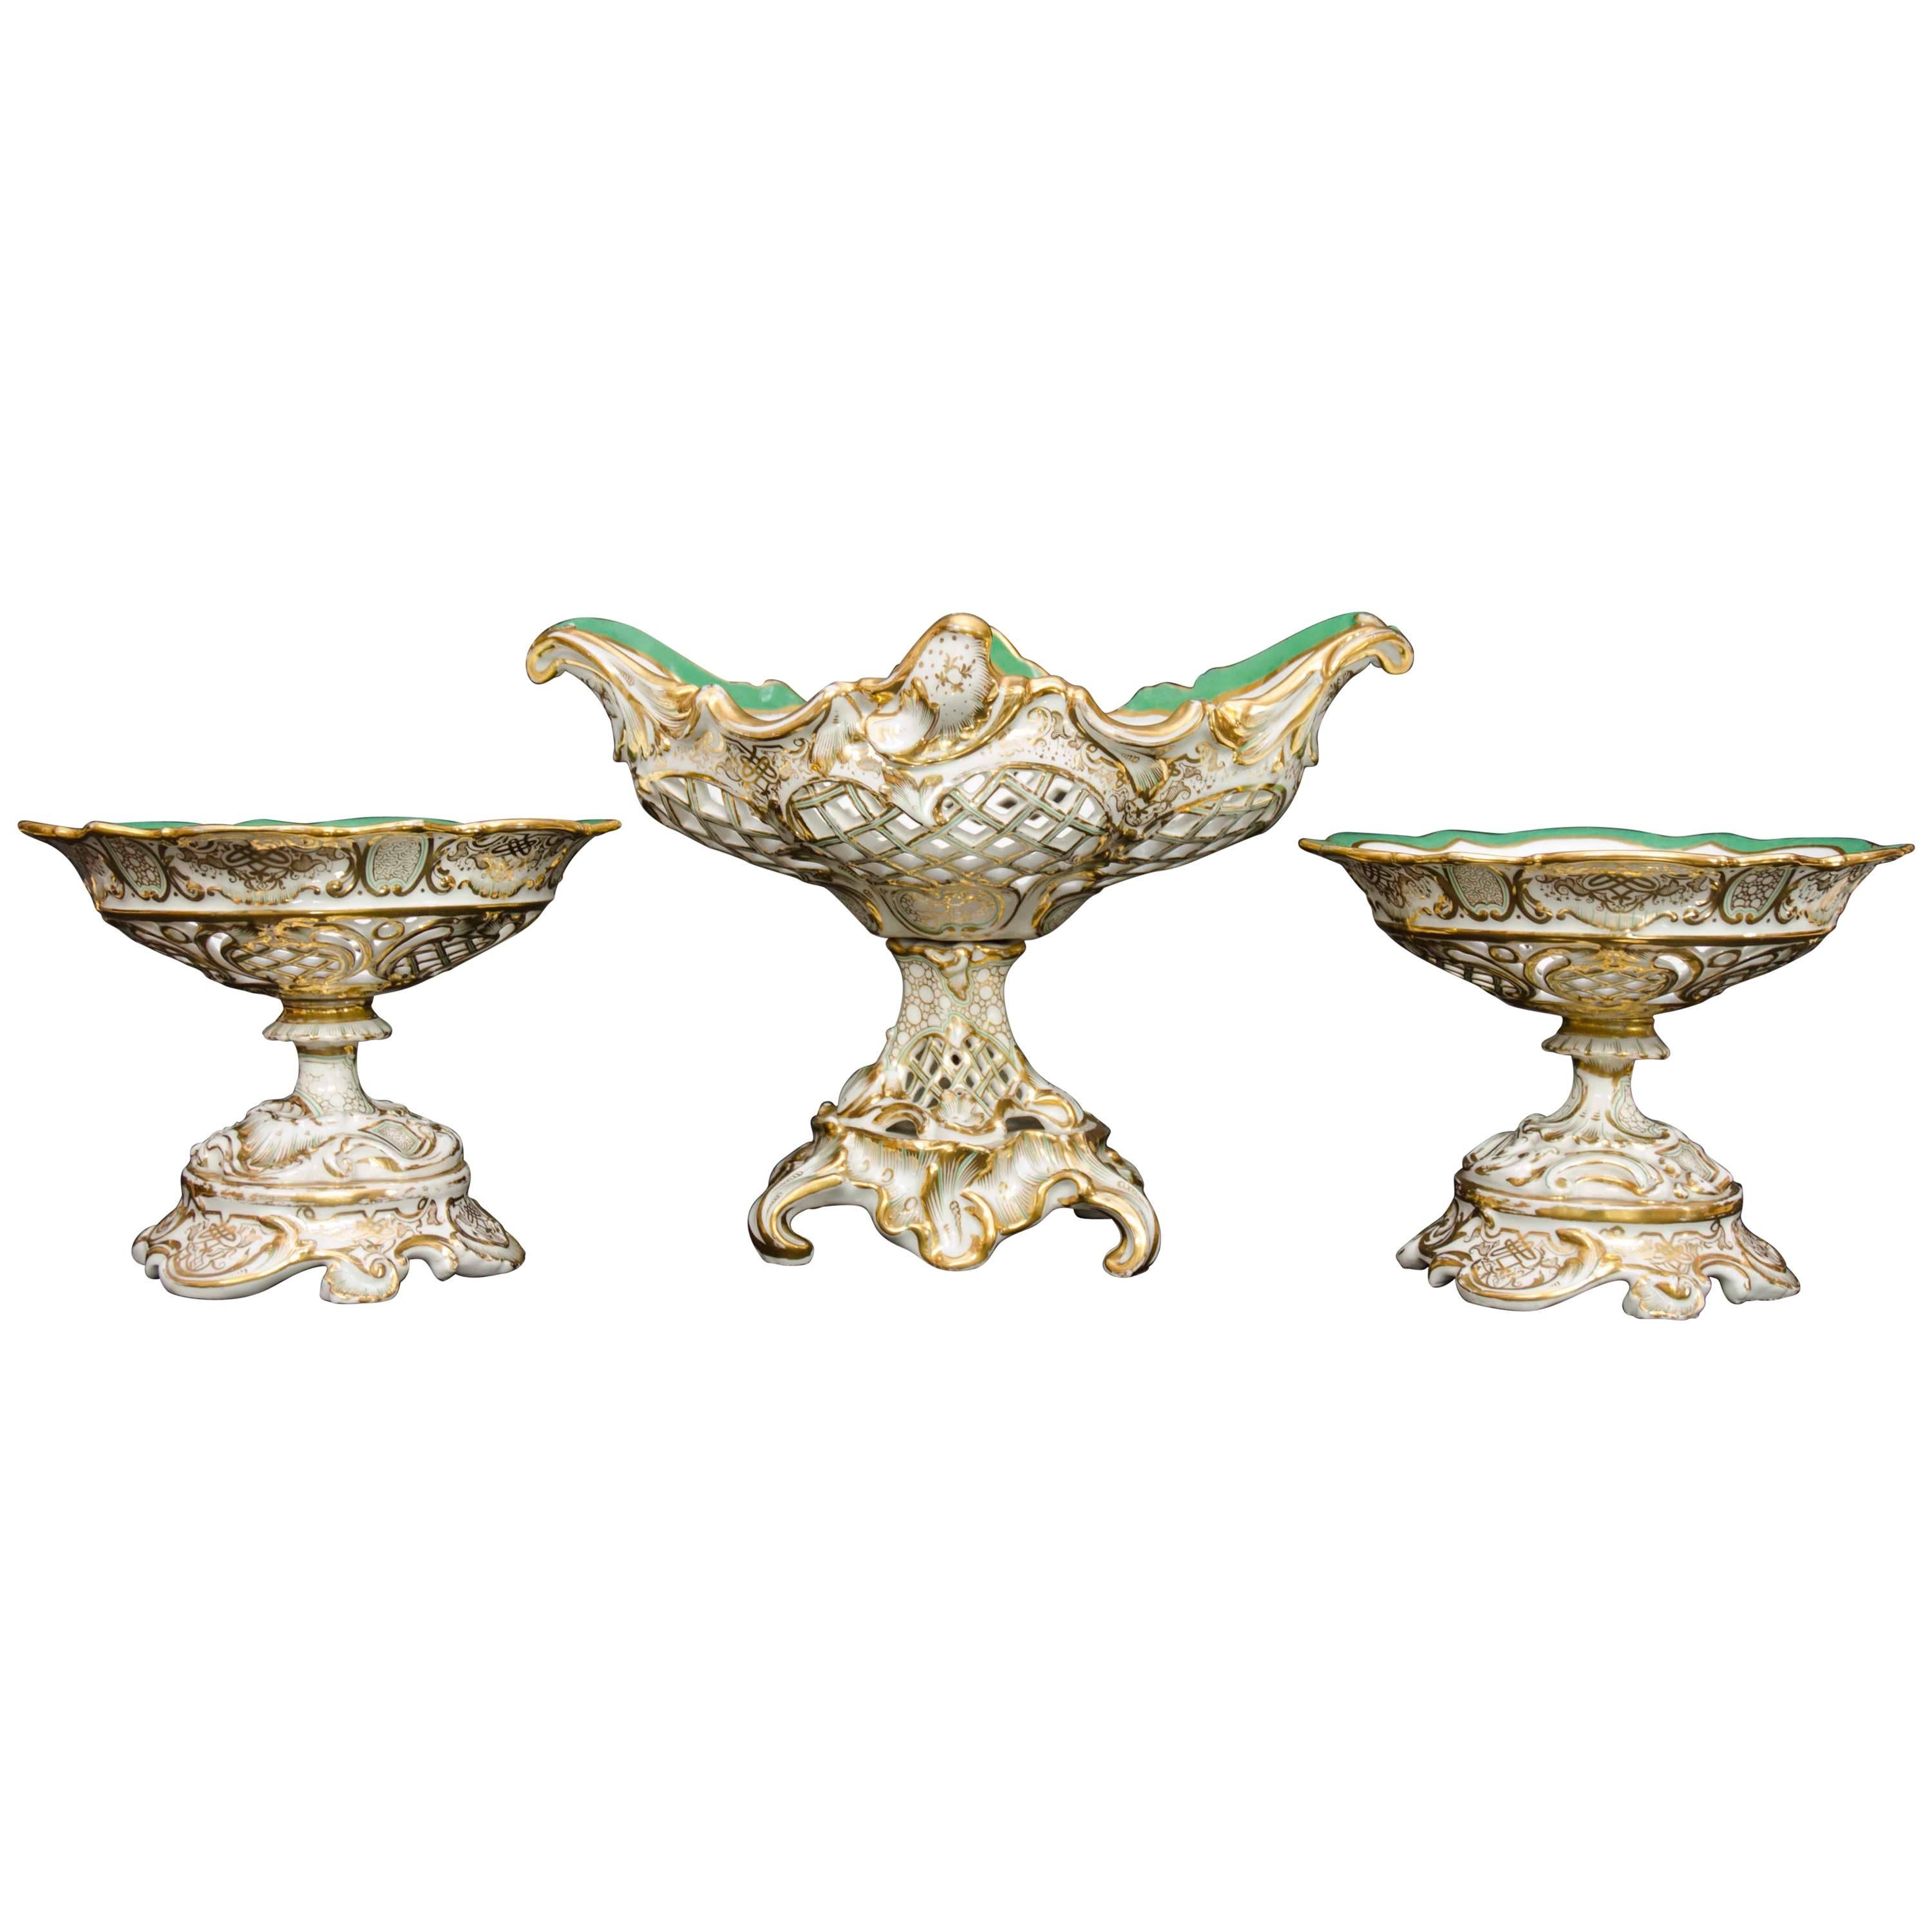 19th Century Rococo Garniture with Three Porcelain Baskets Signed Cappellemans For Sale